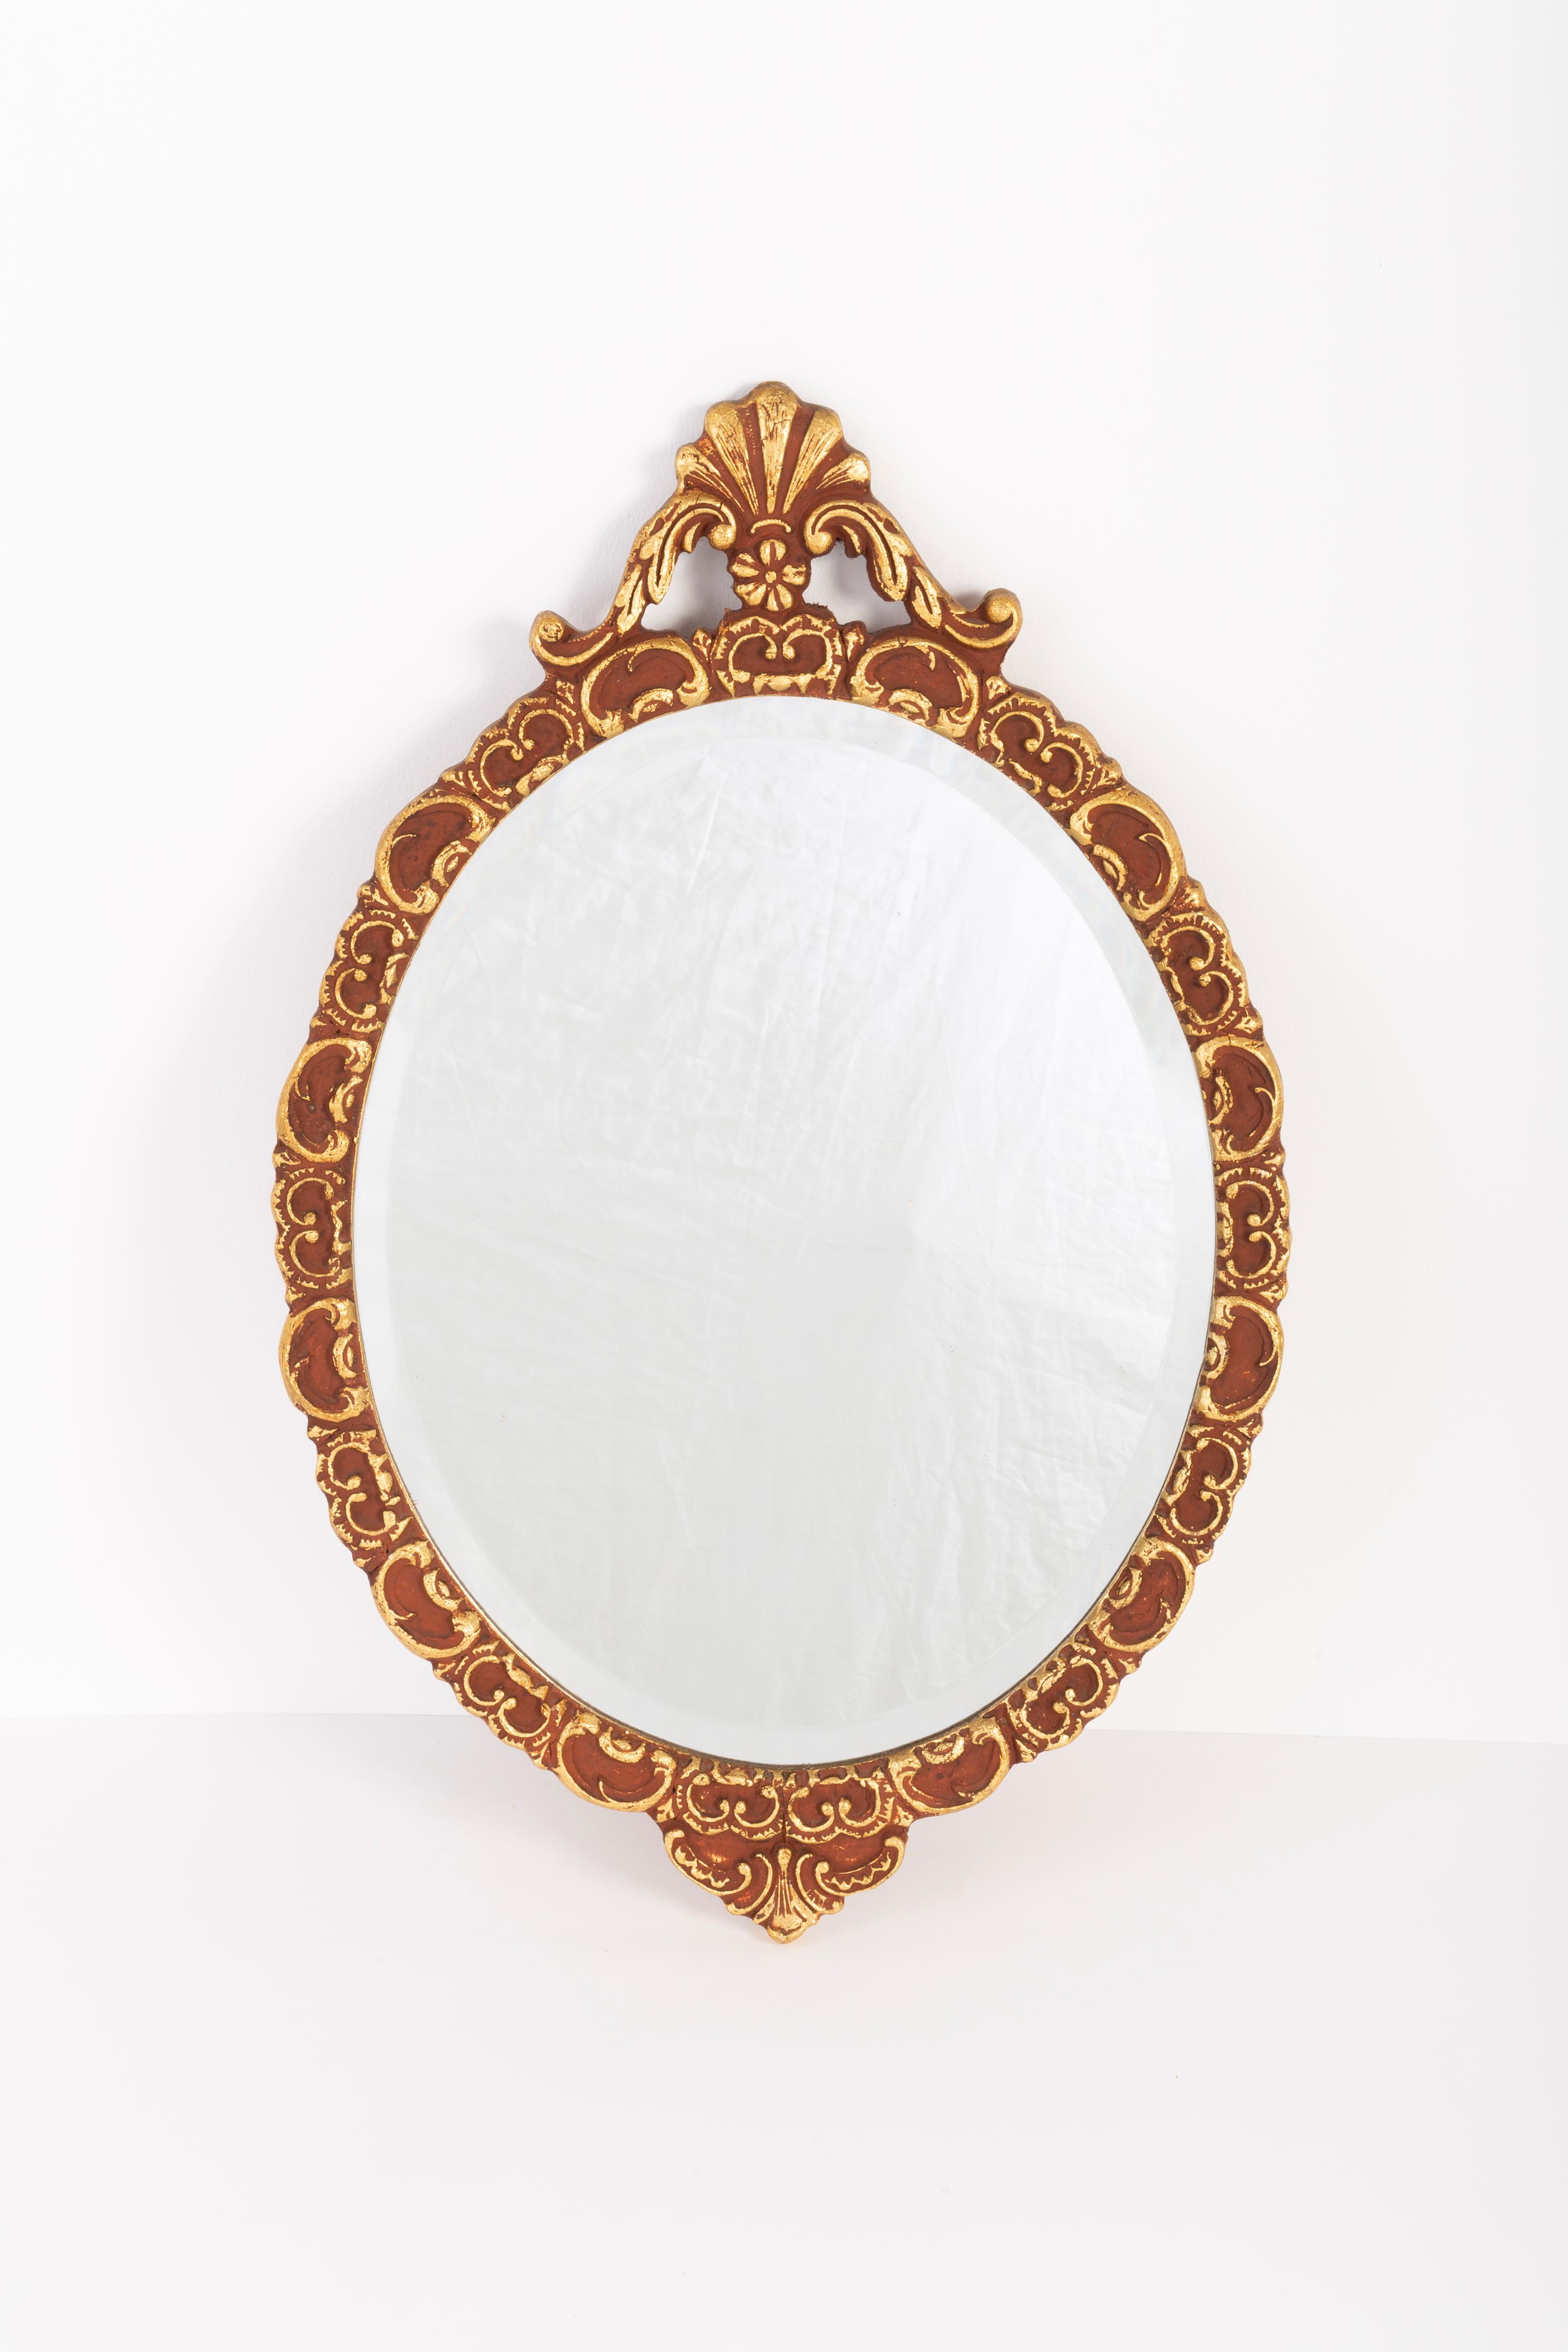 A mirror in a golden decorative frame from Italy. The frame is made of wood. Mirror is in very good vintage condition, no damage or cracks in the frame. Beautiful piece for every interior! Only one unique piece.